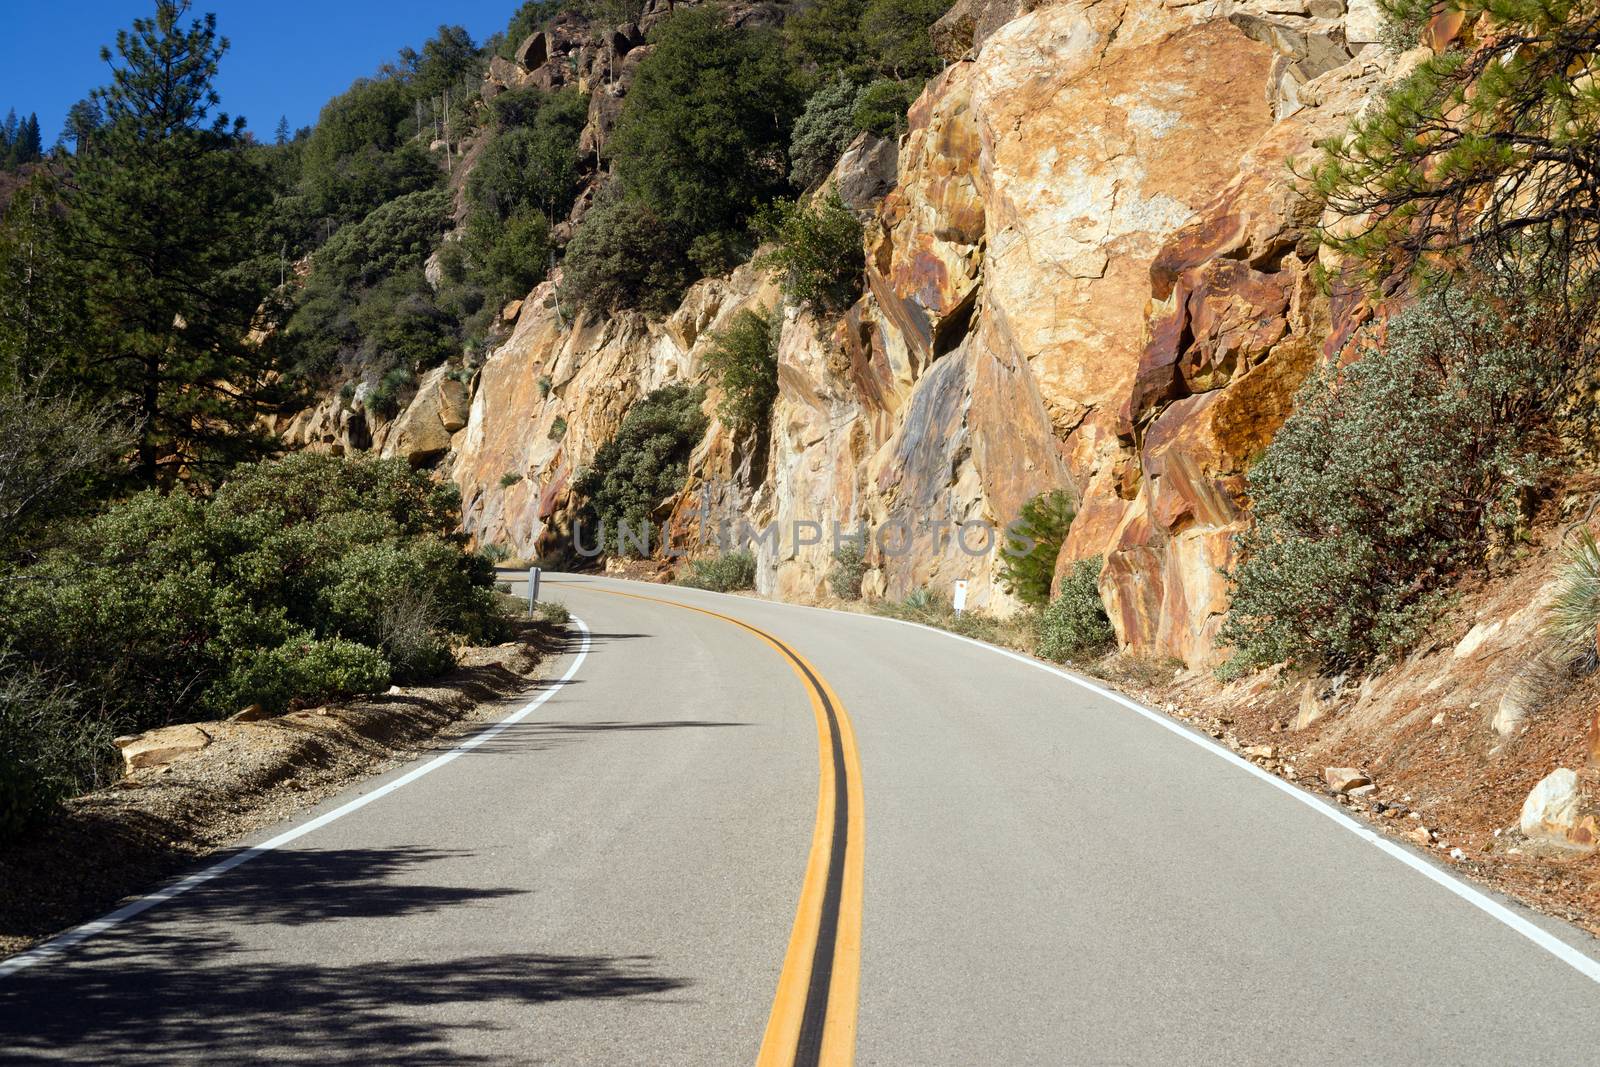 Two Lane Road Through Granite Rock King's Canyon California by ChrisBoswell